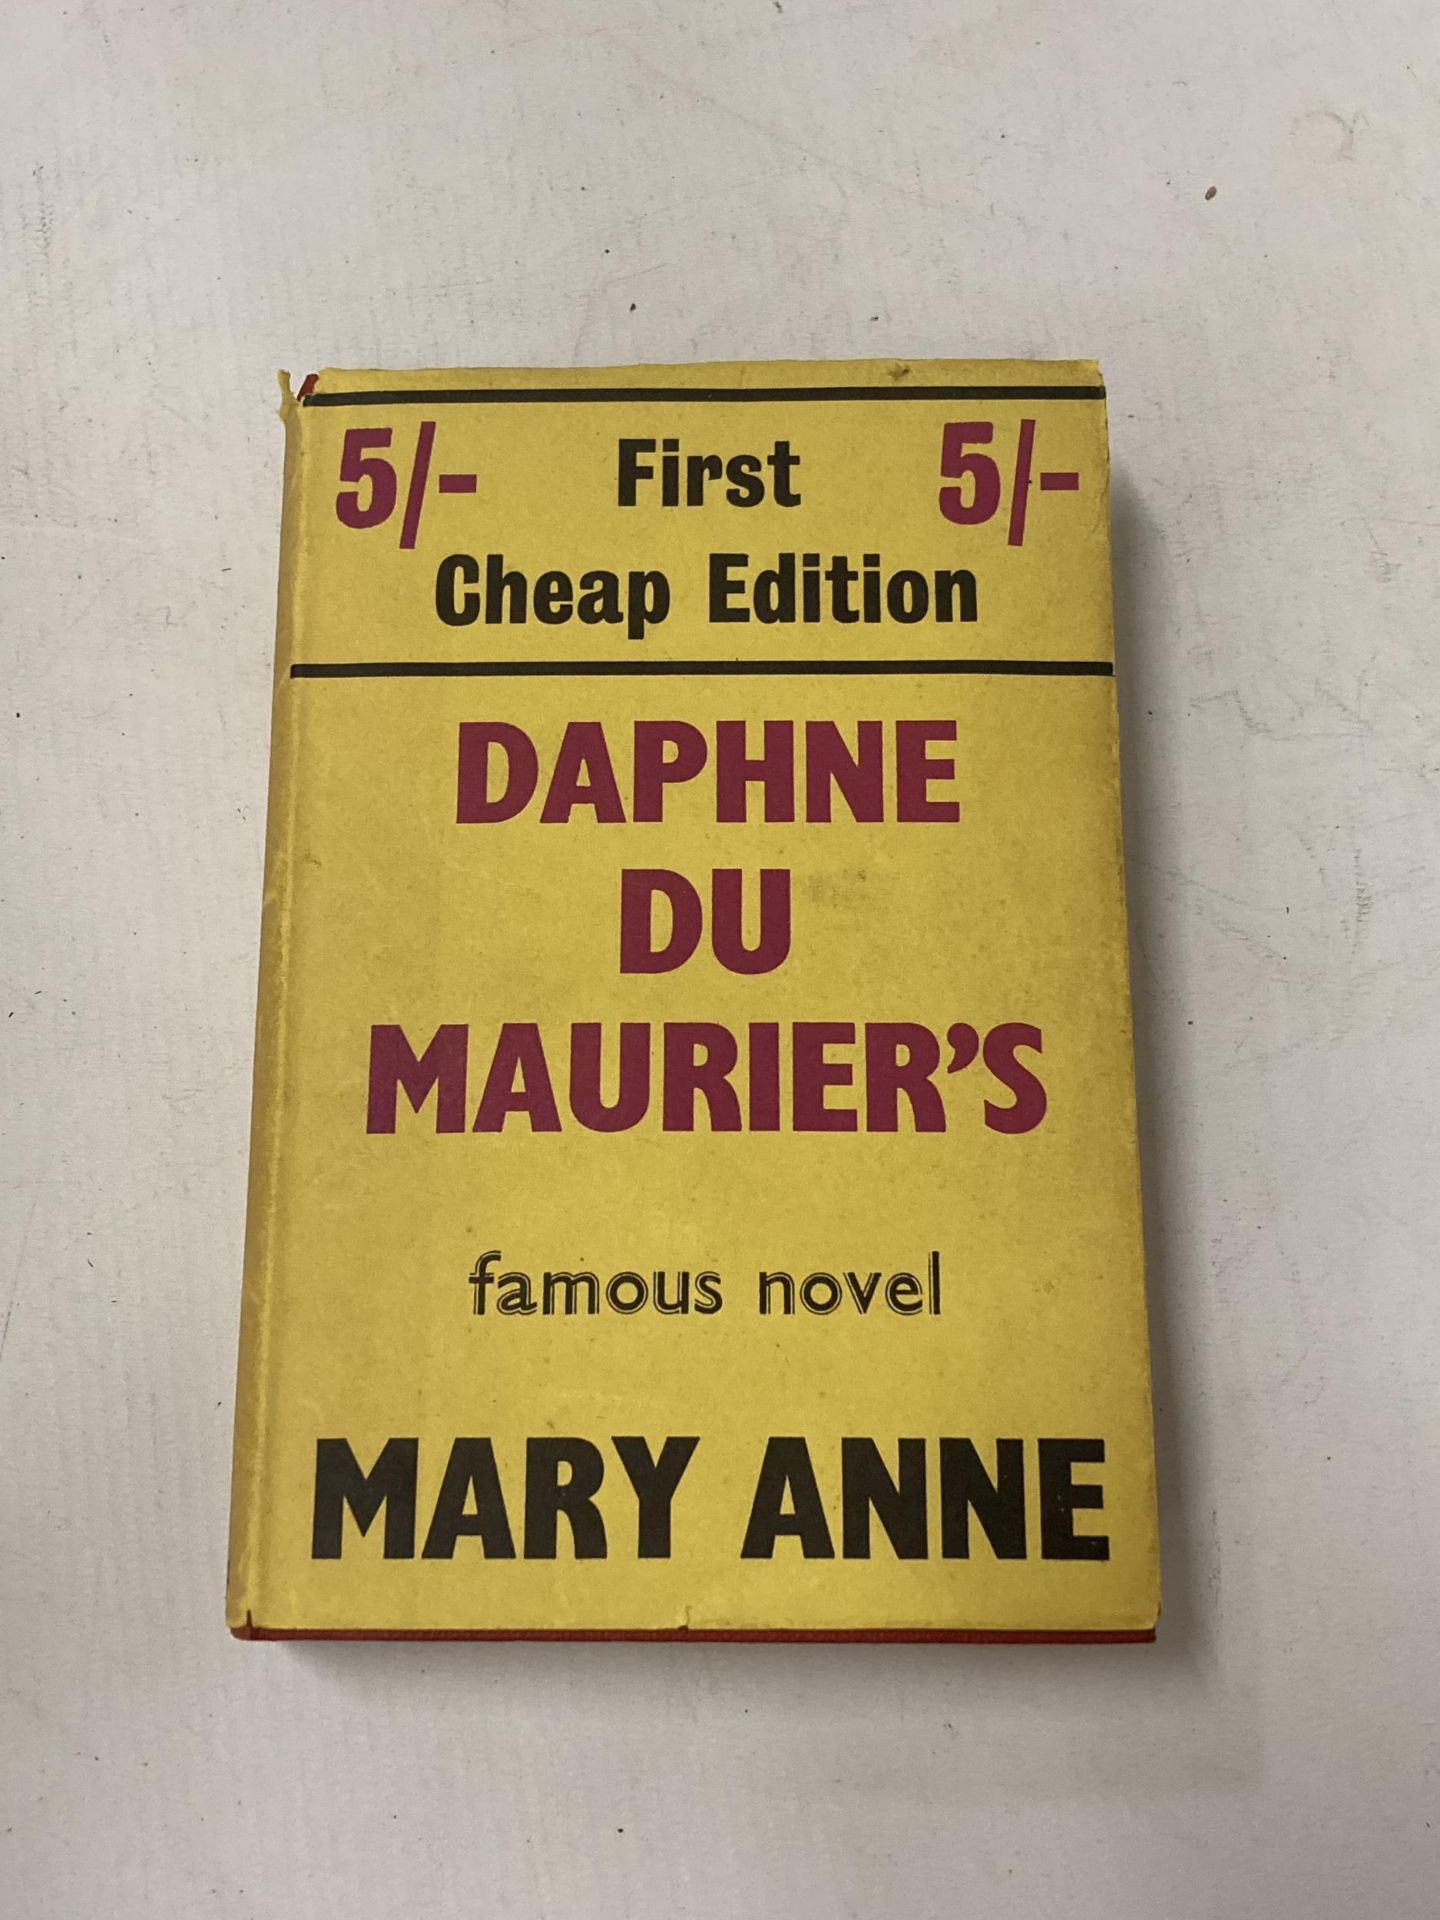 DAPHNE DU MAURIER'S MARY ANNE, 1ST EDITION, 1954 BOOK